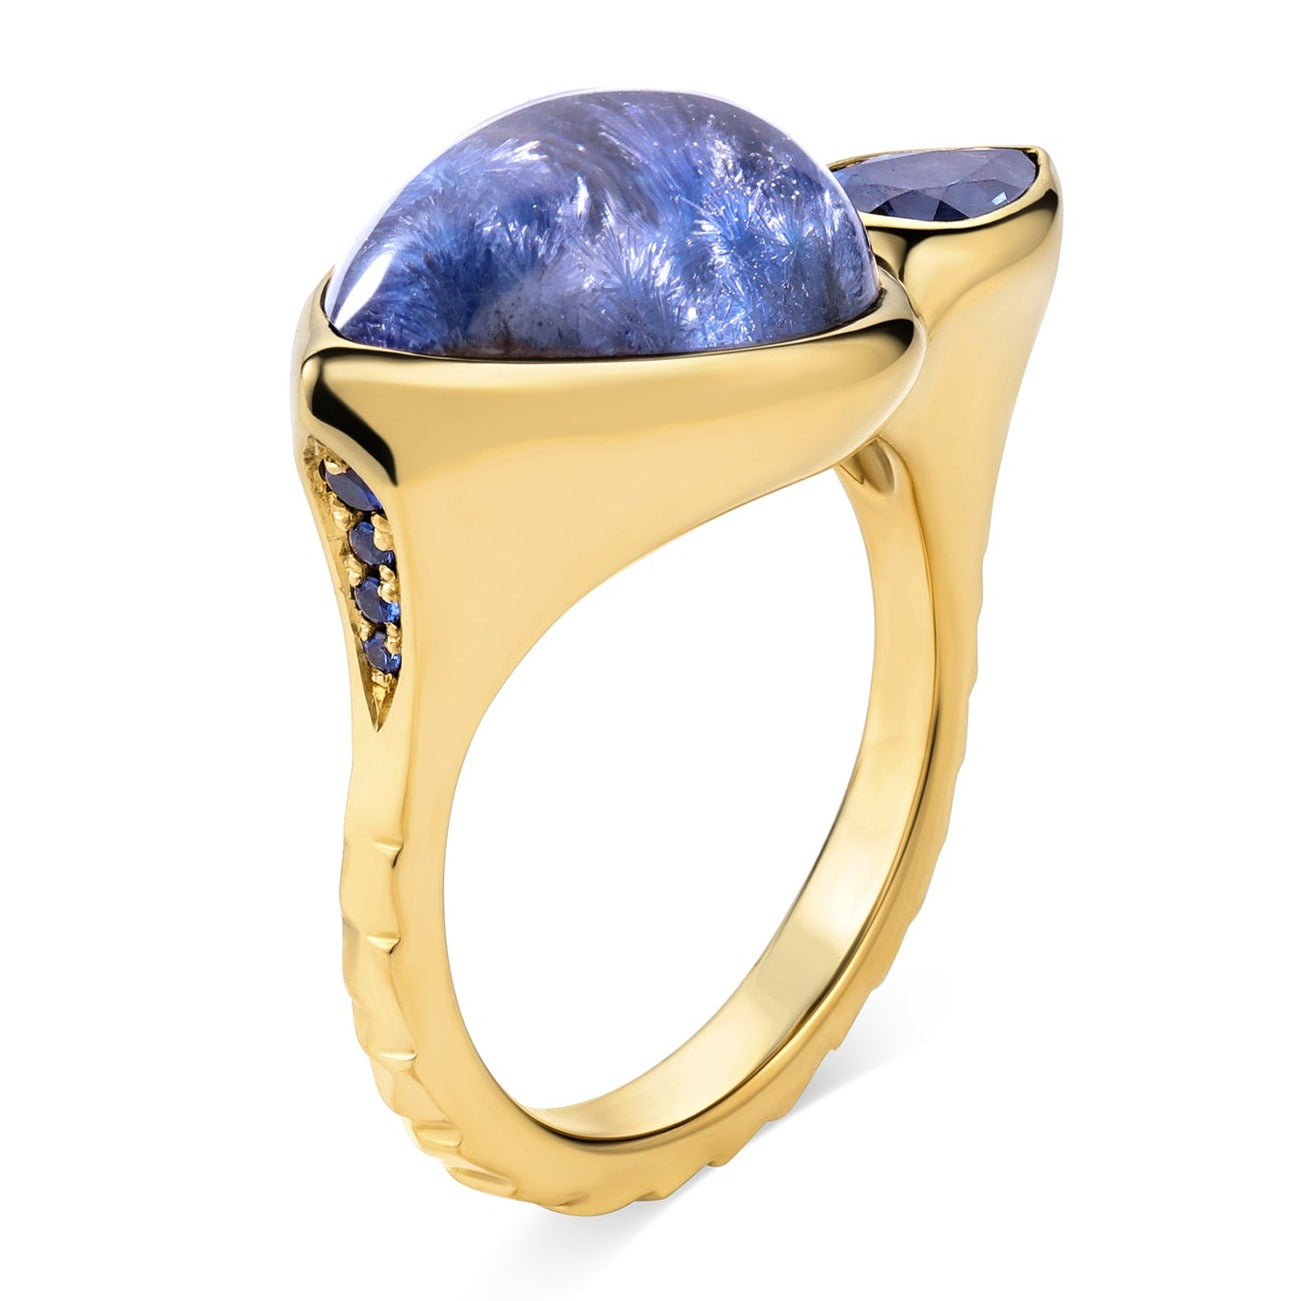 Once In a Blue World - Dumortierite and Montana Sapphire Ring